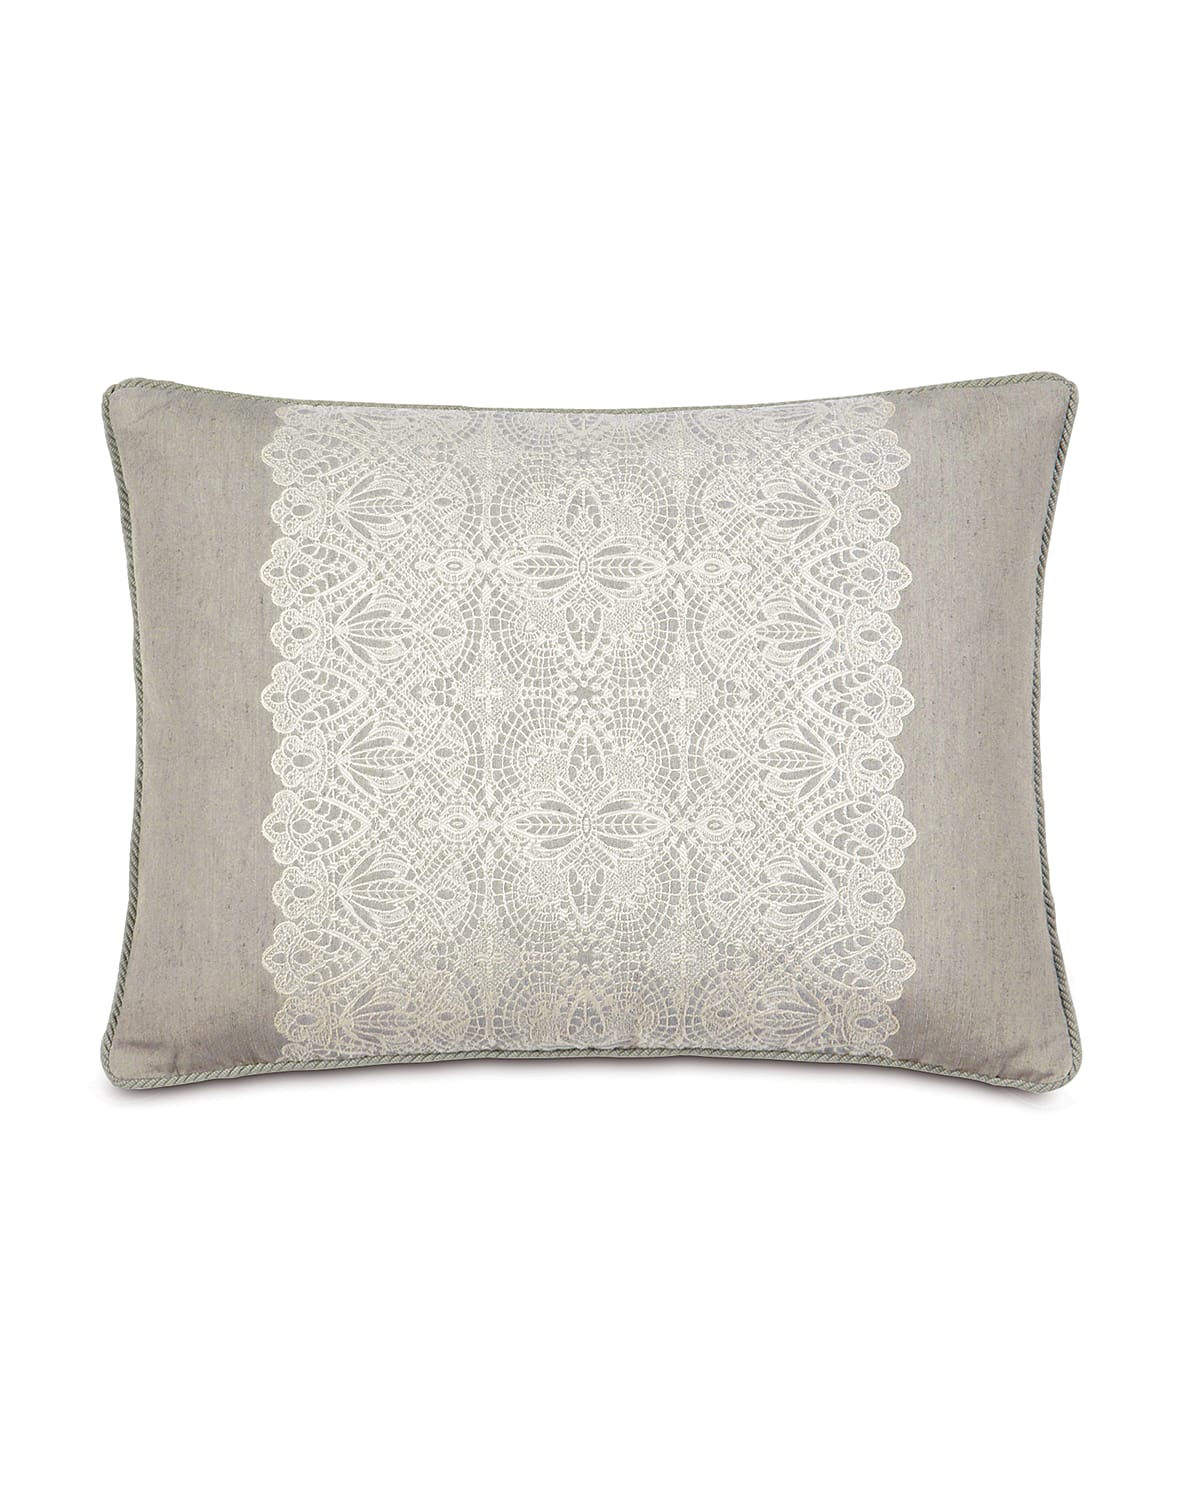 Image Eastern Accents Thayer Standard Pillow, 20" x 27"